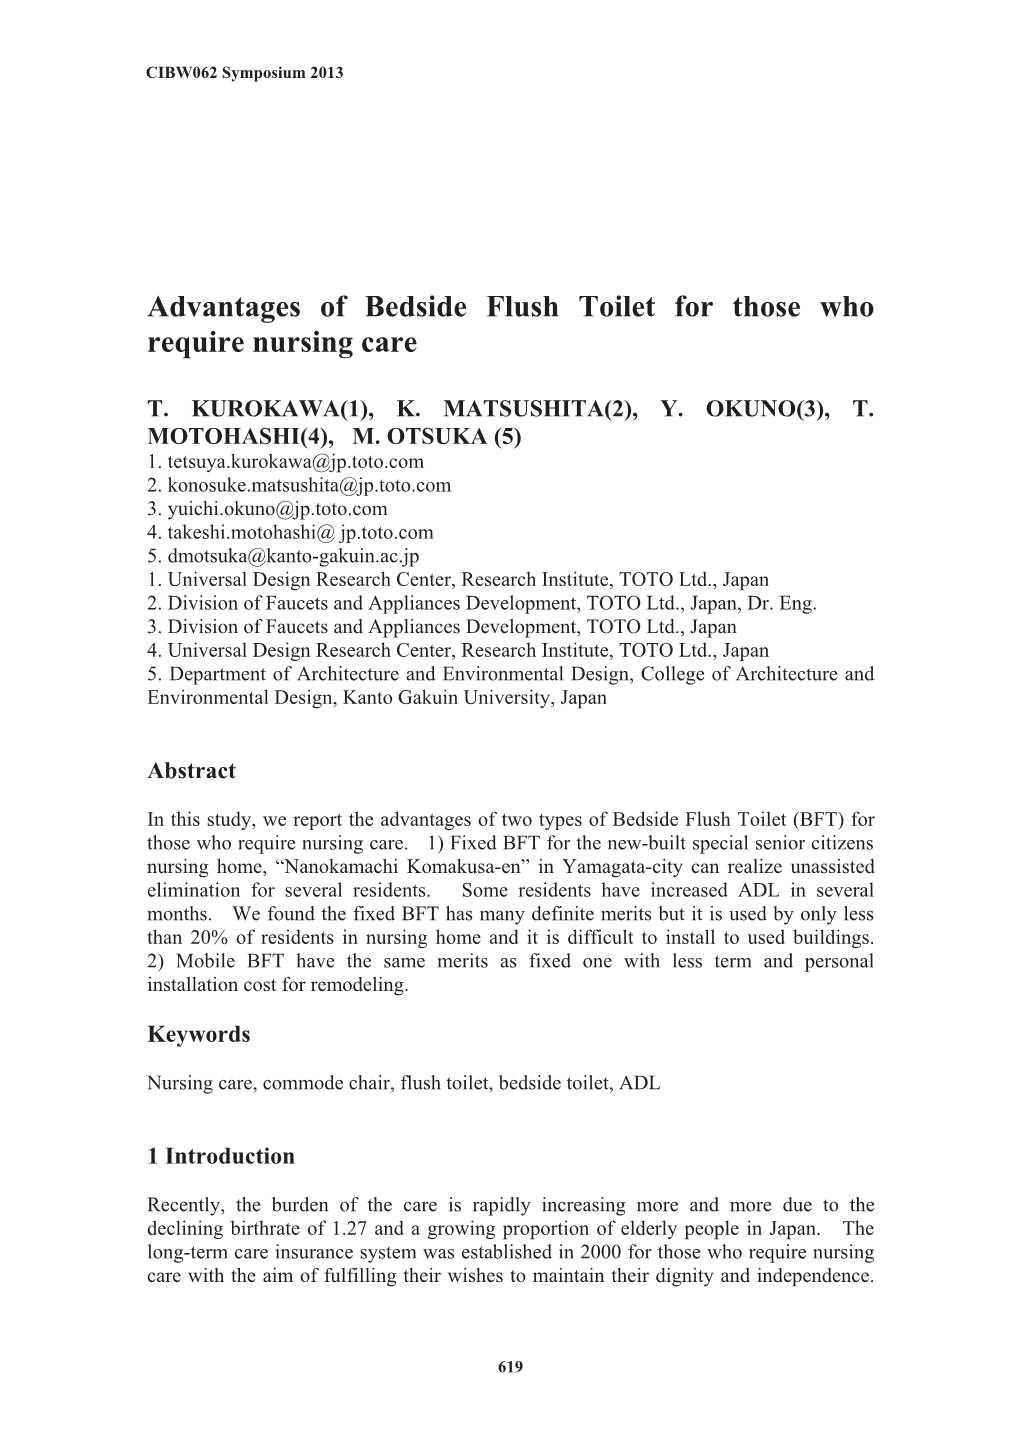 Advantages of Bedside Flush Toilet for Those Who Require Nursing Care